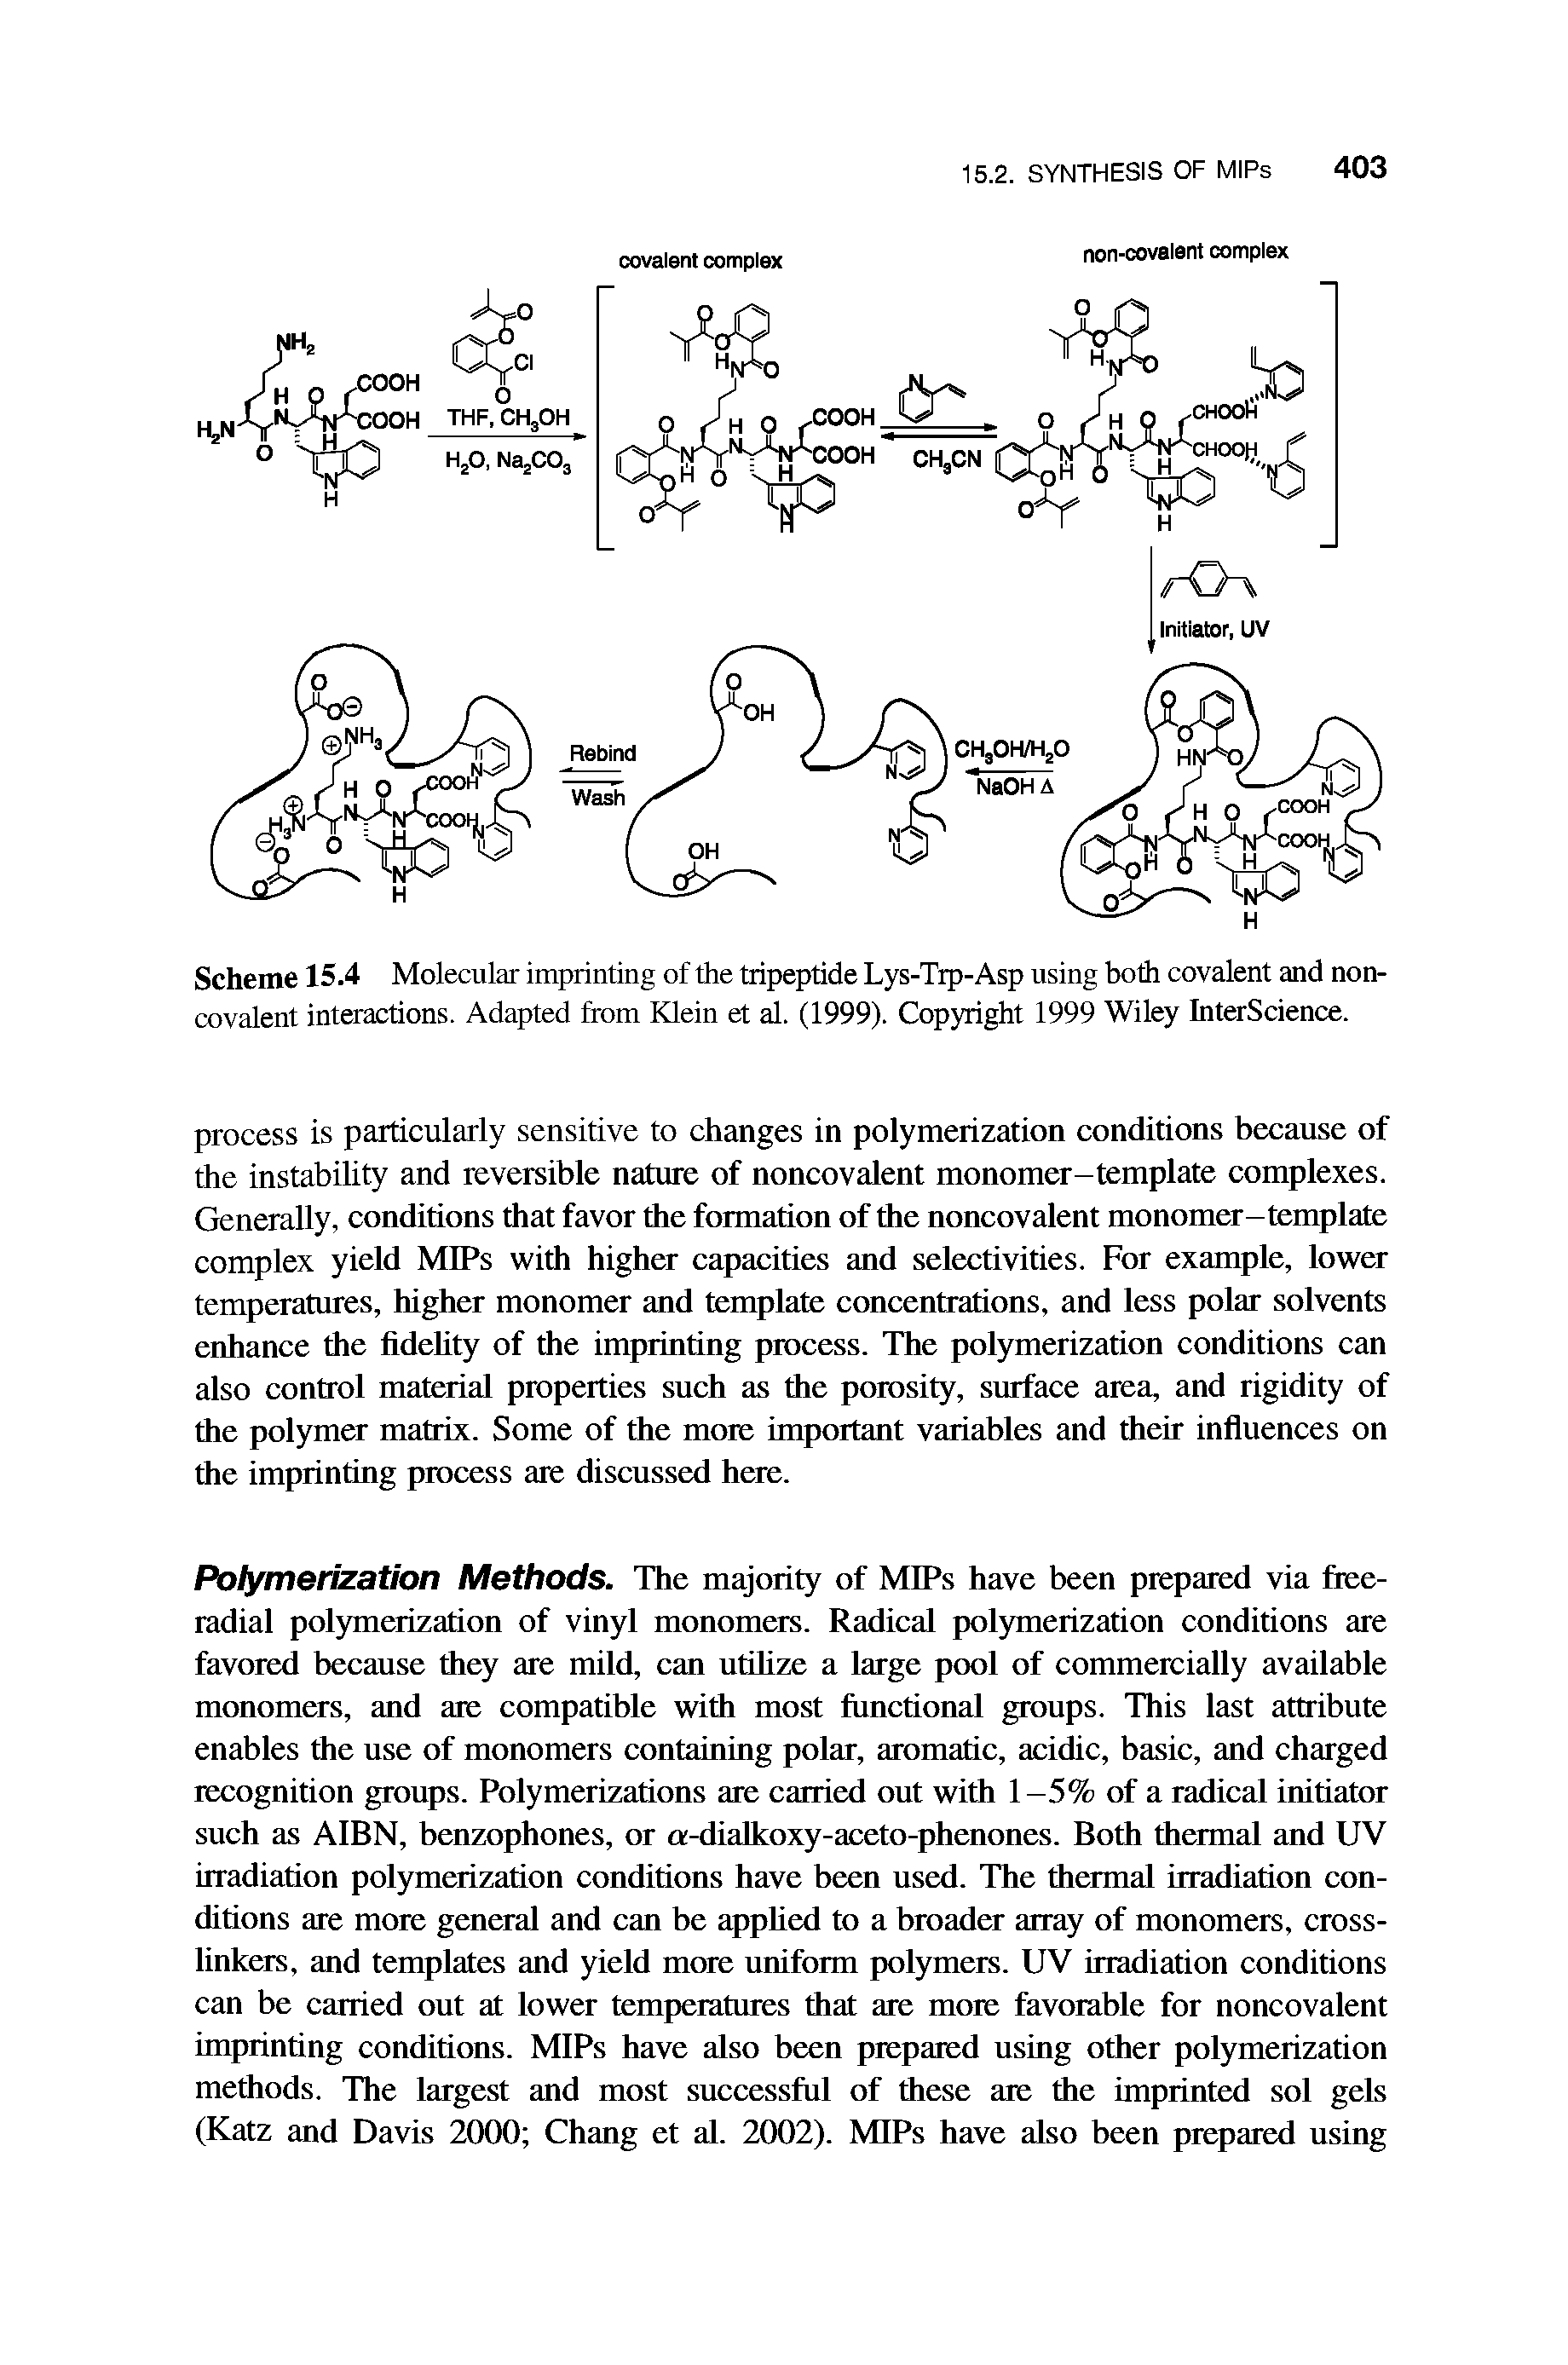 Scheme 15.4 Molecular imprinting of the tripeptide Lys-Trp-Asp using both covalent and non-covalent interactions. Adapted from Klein et al. (1999). Copyright 1999 Wiley InterScience.